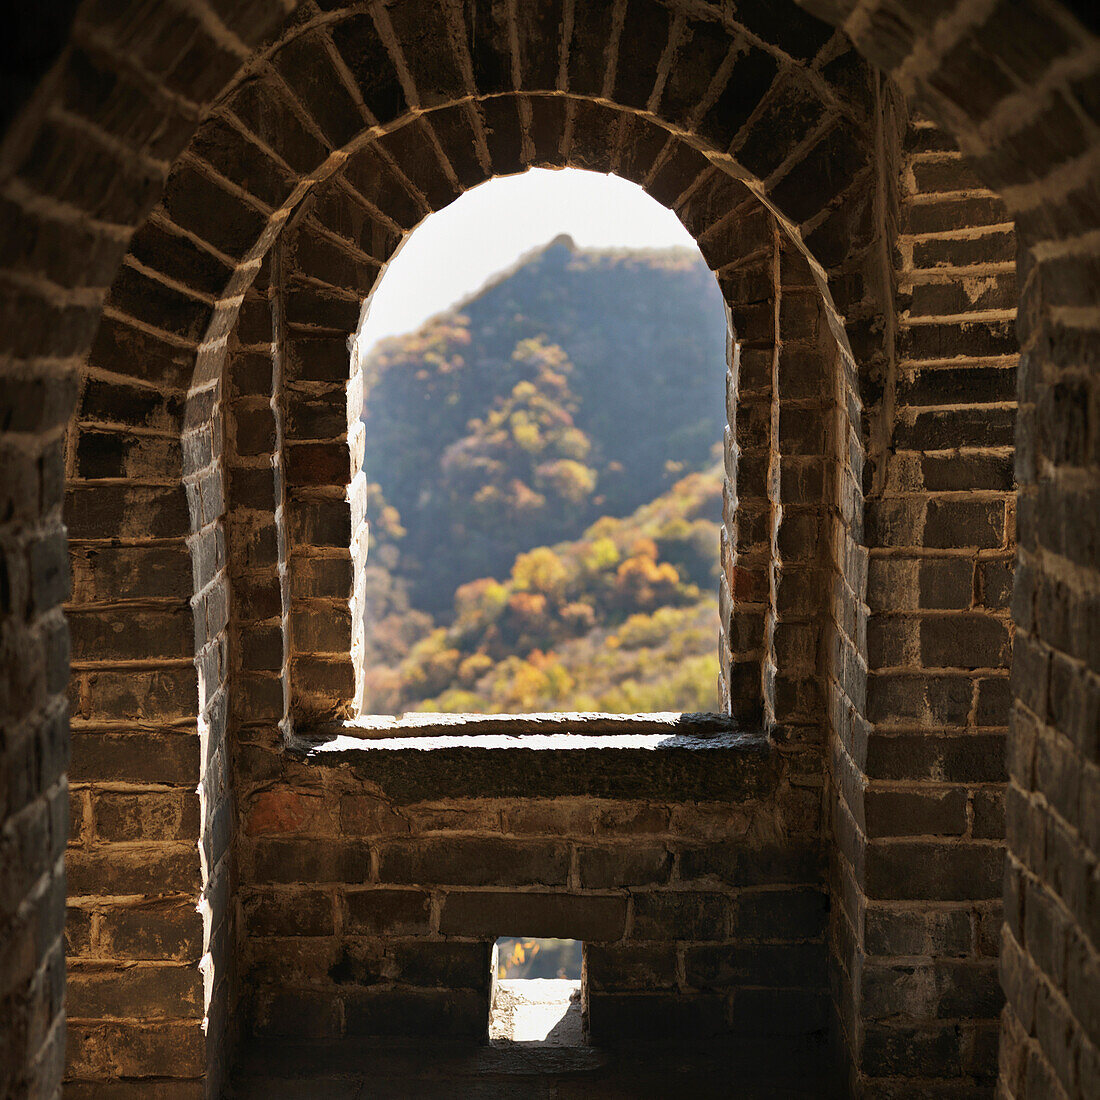 'Window In The Mutianyu Section Of The Great Wall Of China; Beijing, China'